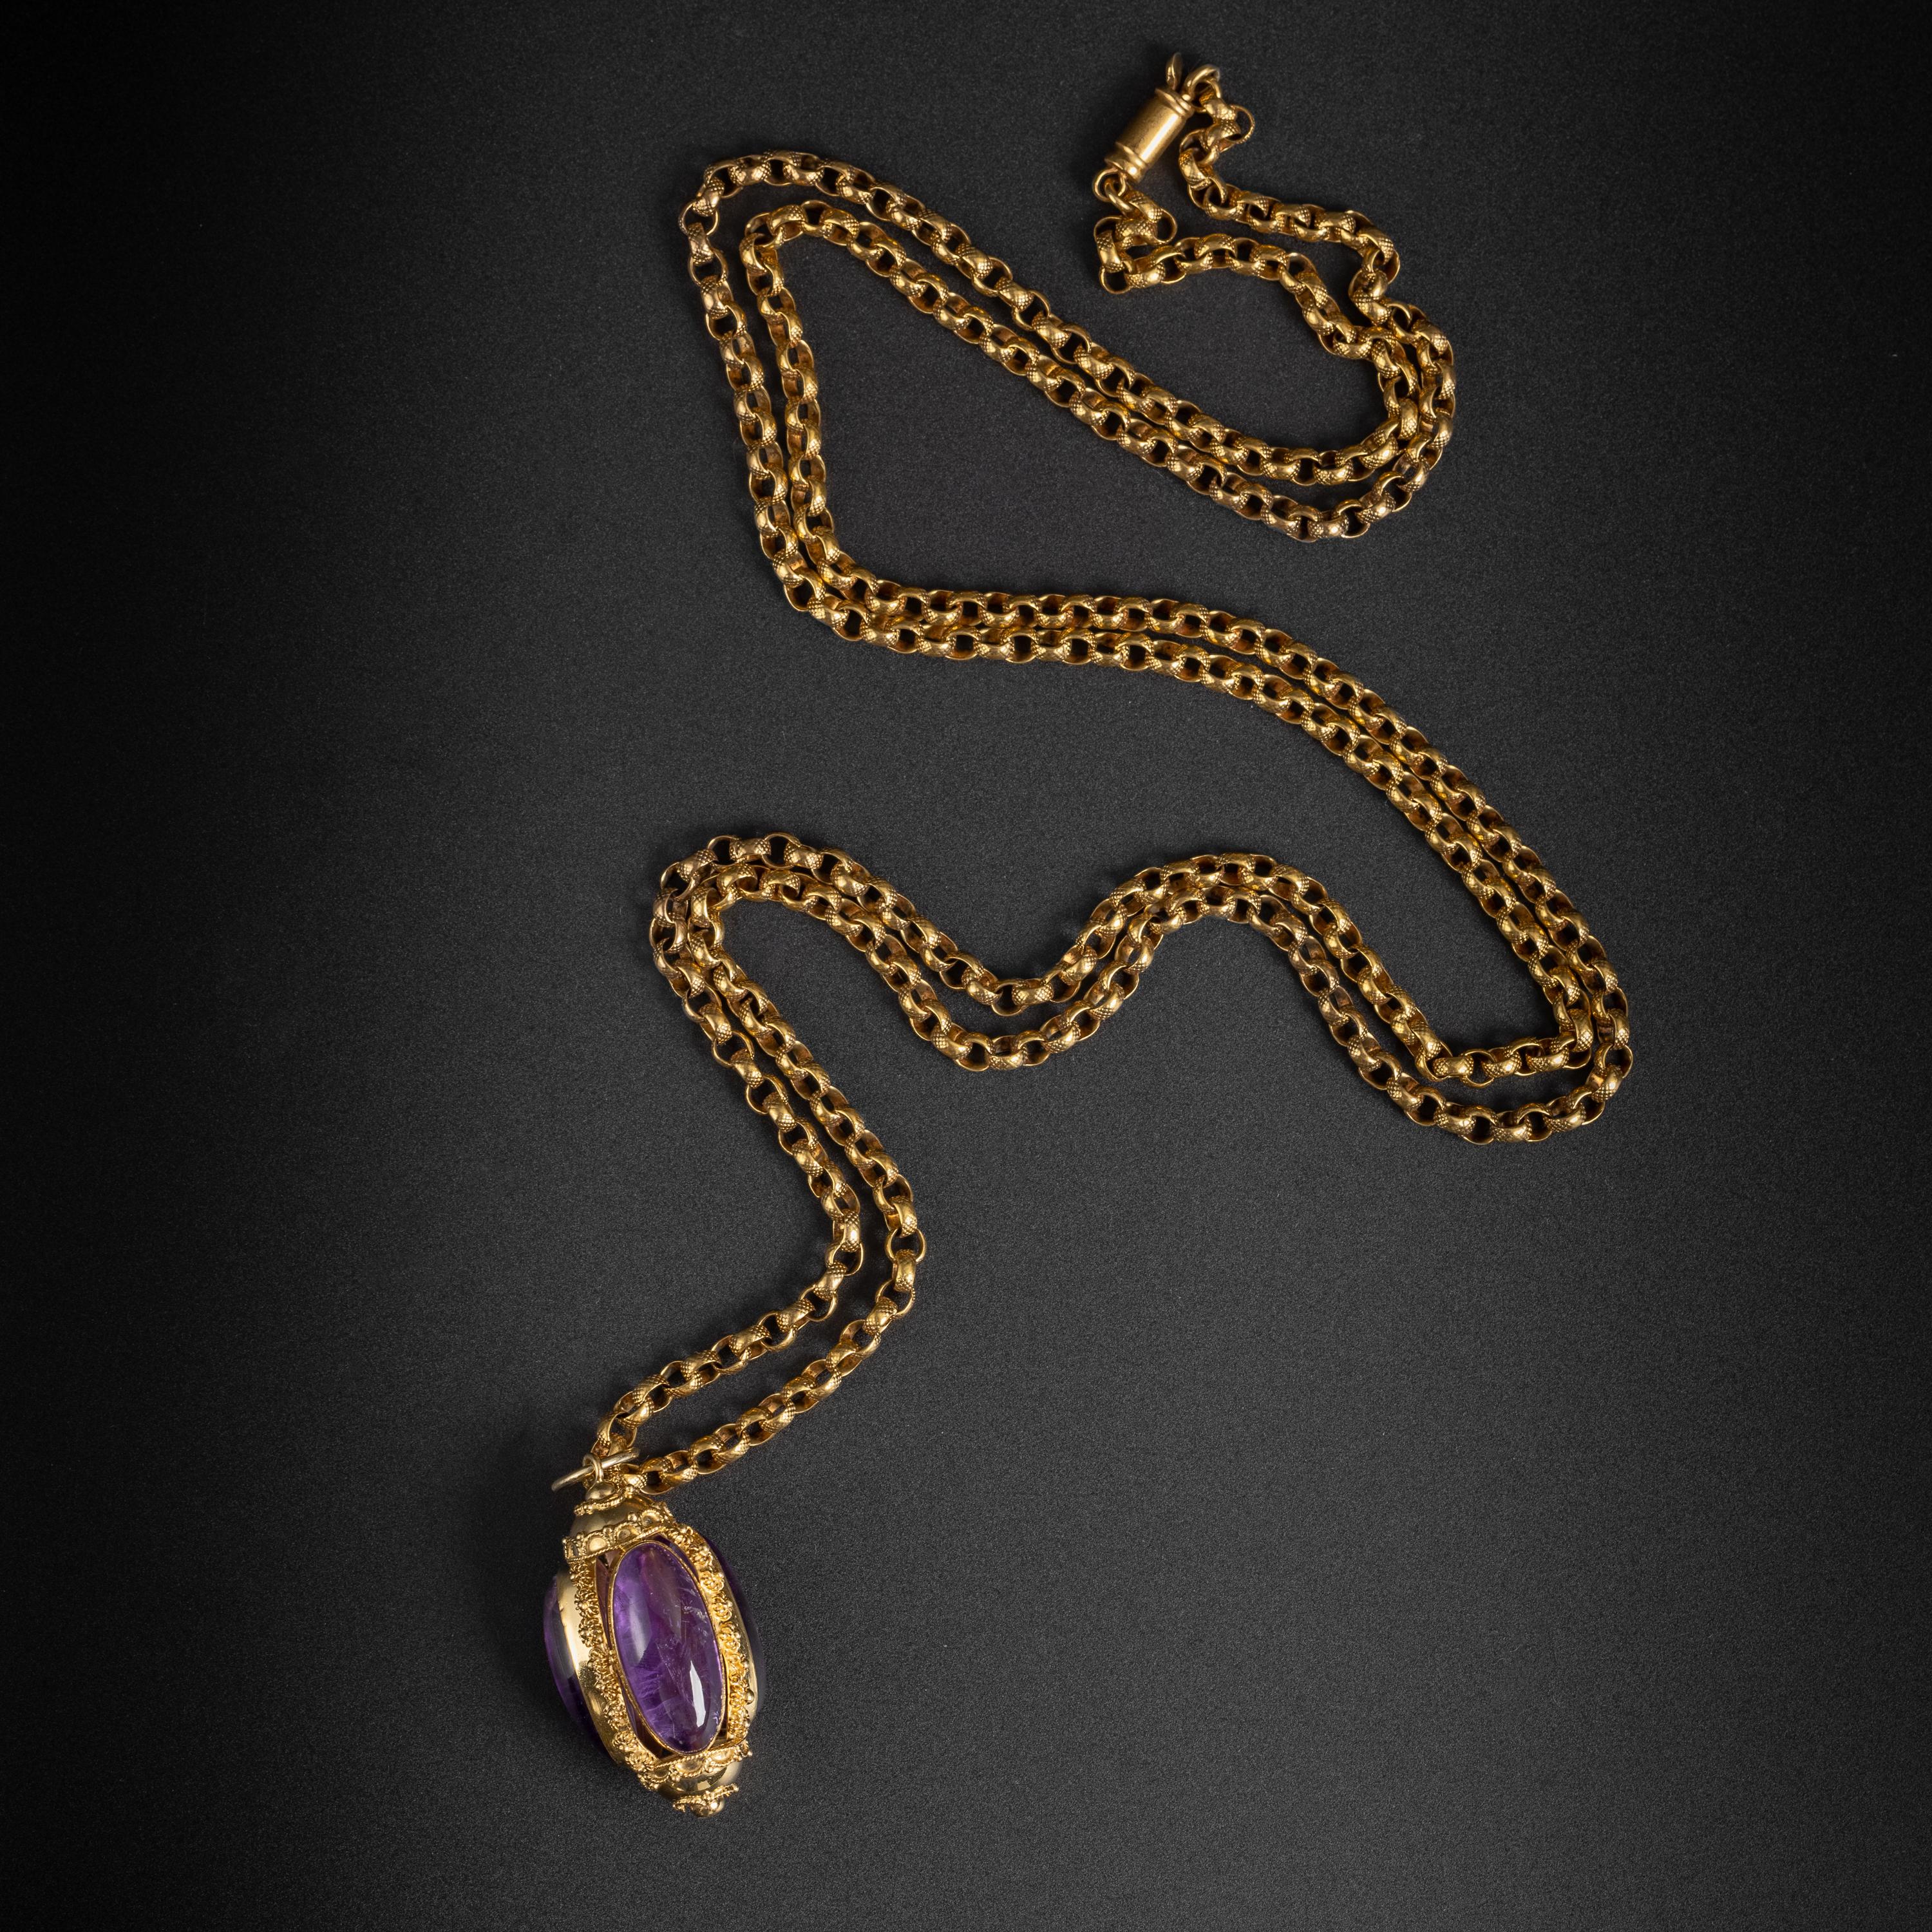 This is a finely crafted Etruscan revival amethyst and gold three-sided pendant. Each oblong cabochon measures approximately 22mm x 10mm x 5mm and each weighs approximately 9 carats. These 30 carats of amethyst are a fine, rich purple with high